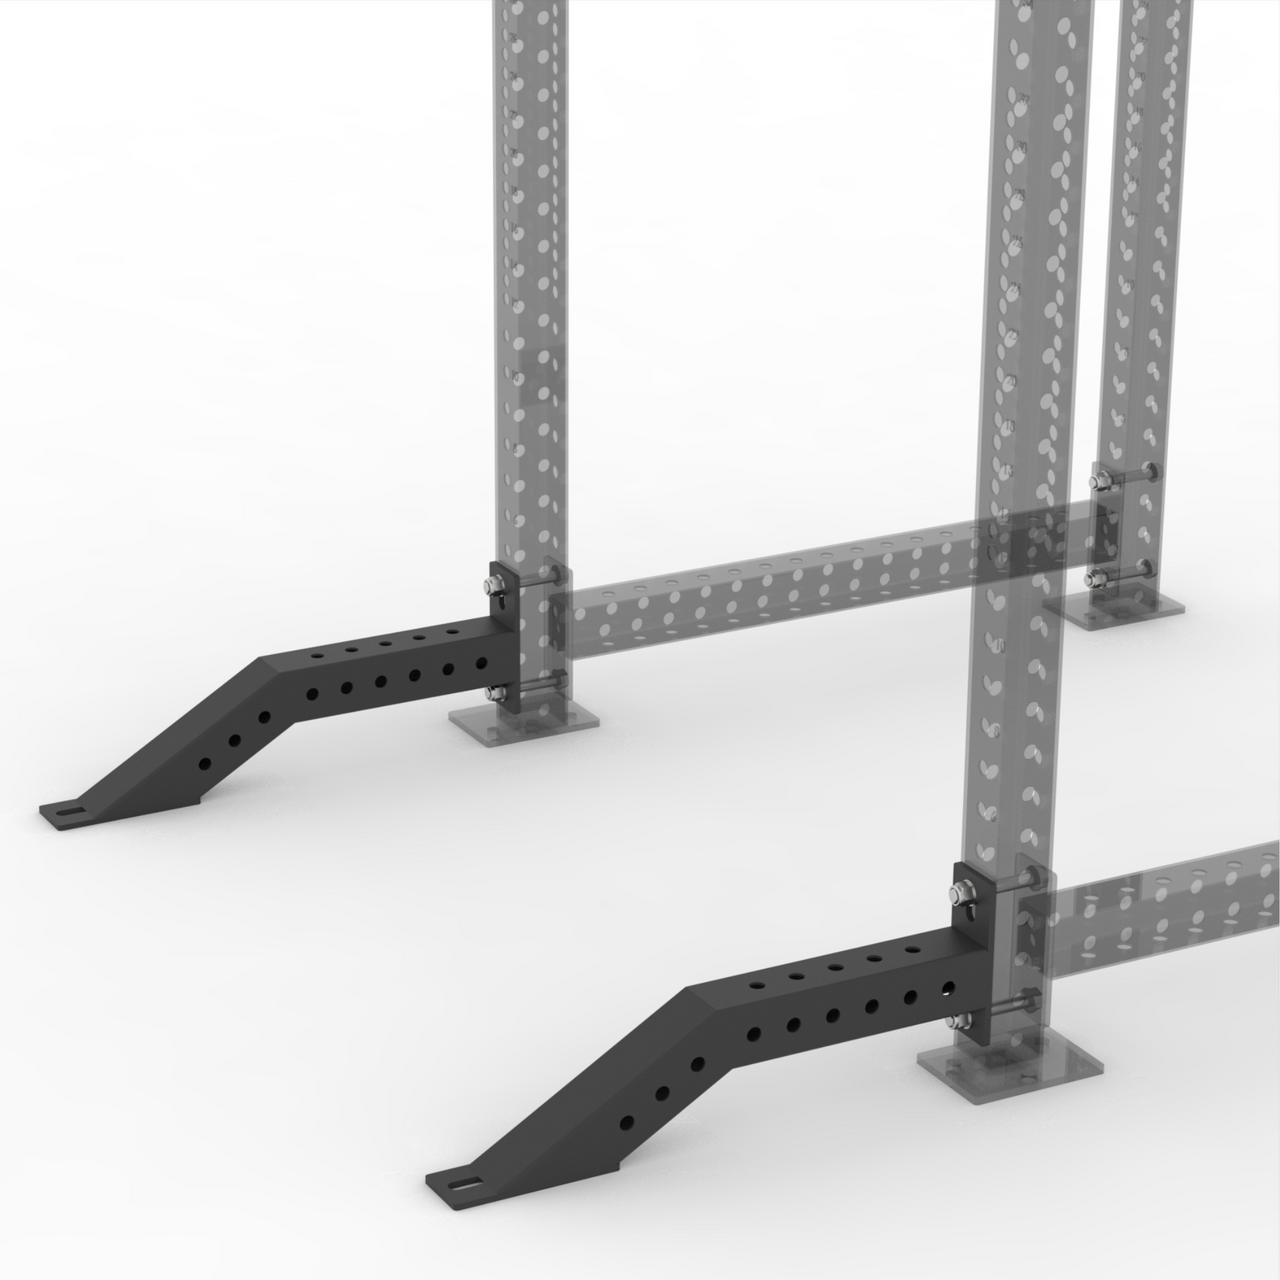 VULCAN Front Foot Extensions Pair for Commercial Power Rack & Rig Uprights | IN STOCK